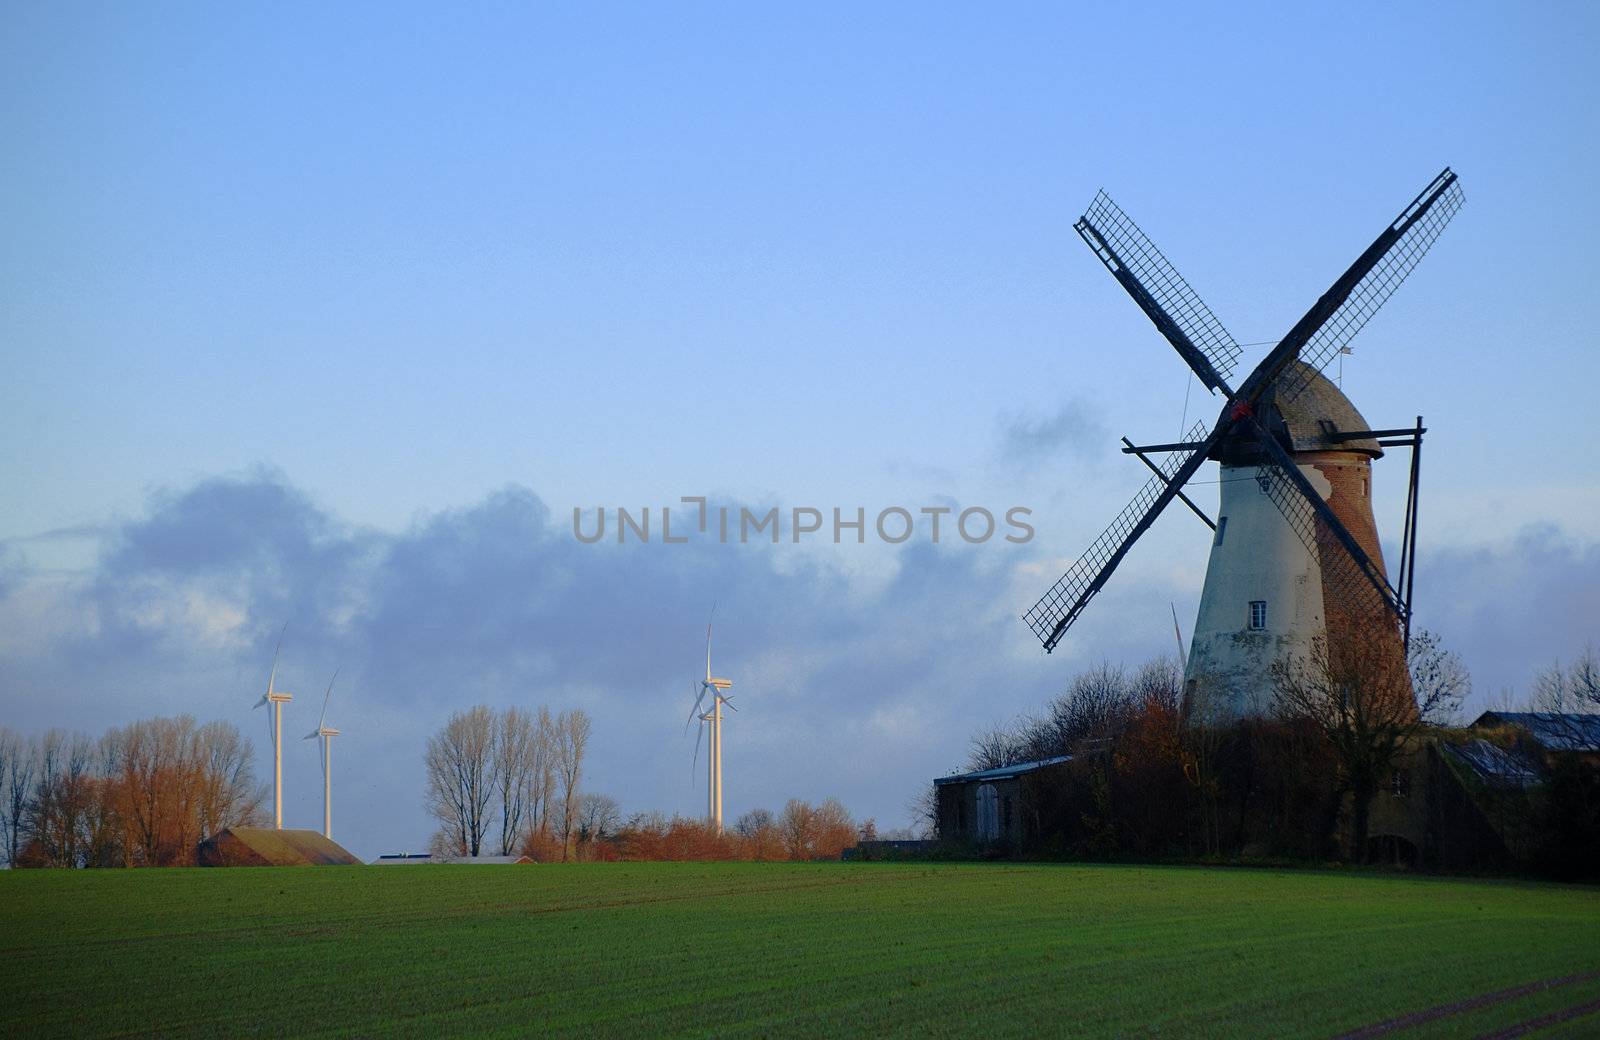 Morning light, traditional windmill in the foreground and modern windmill generators on a background